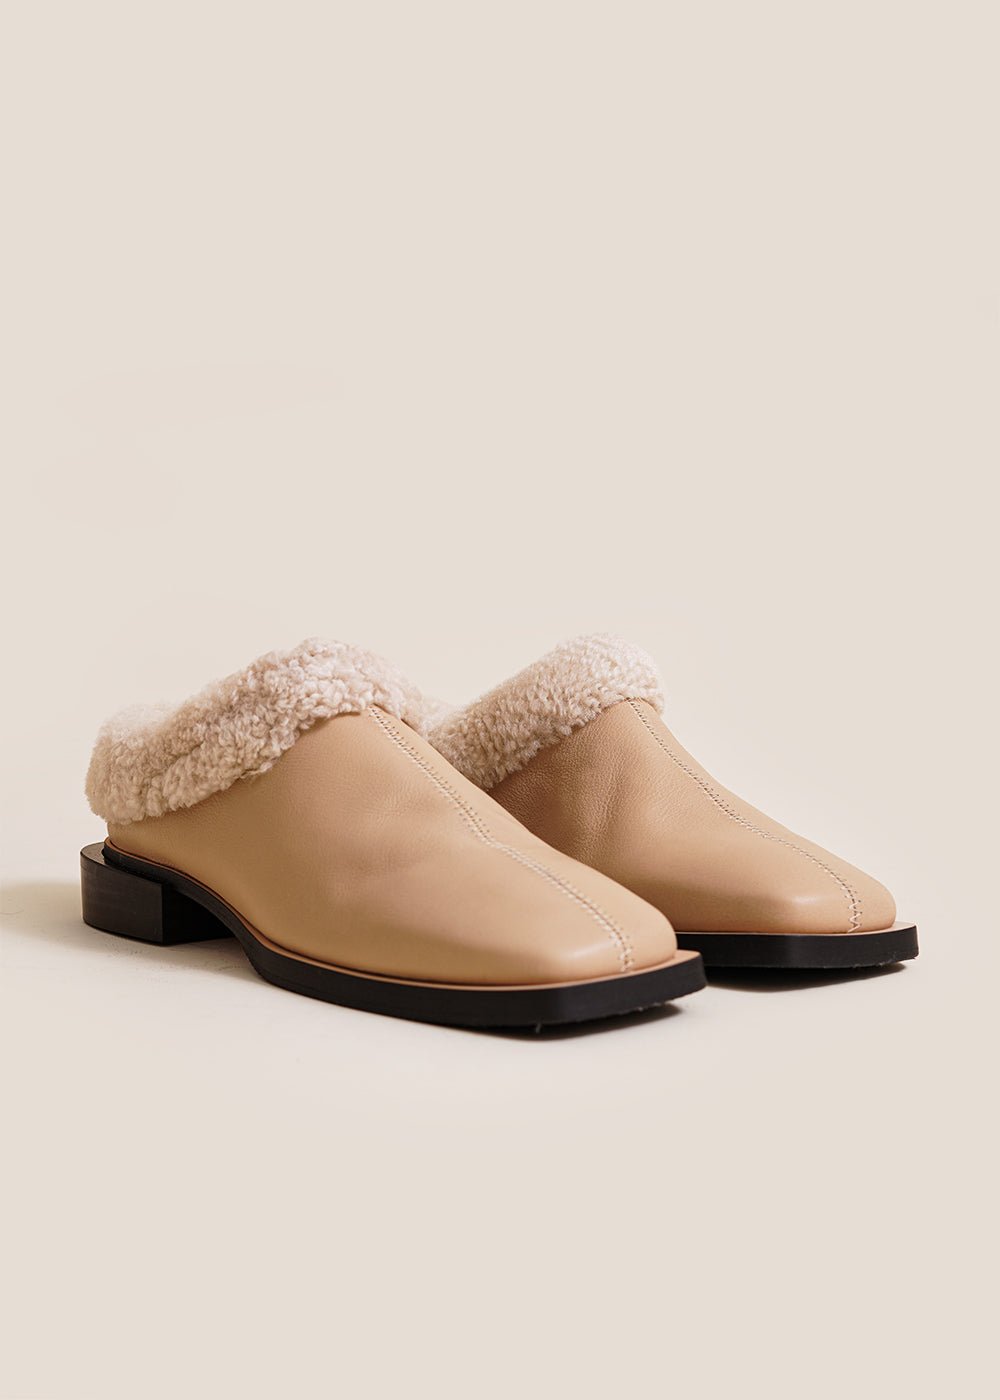 About Arianne Soft Sand Tea Mules - New Classics Studios Sustainable Ethical Fashion Canada